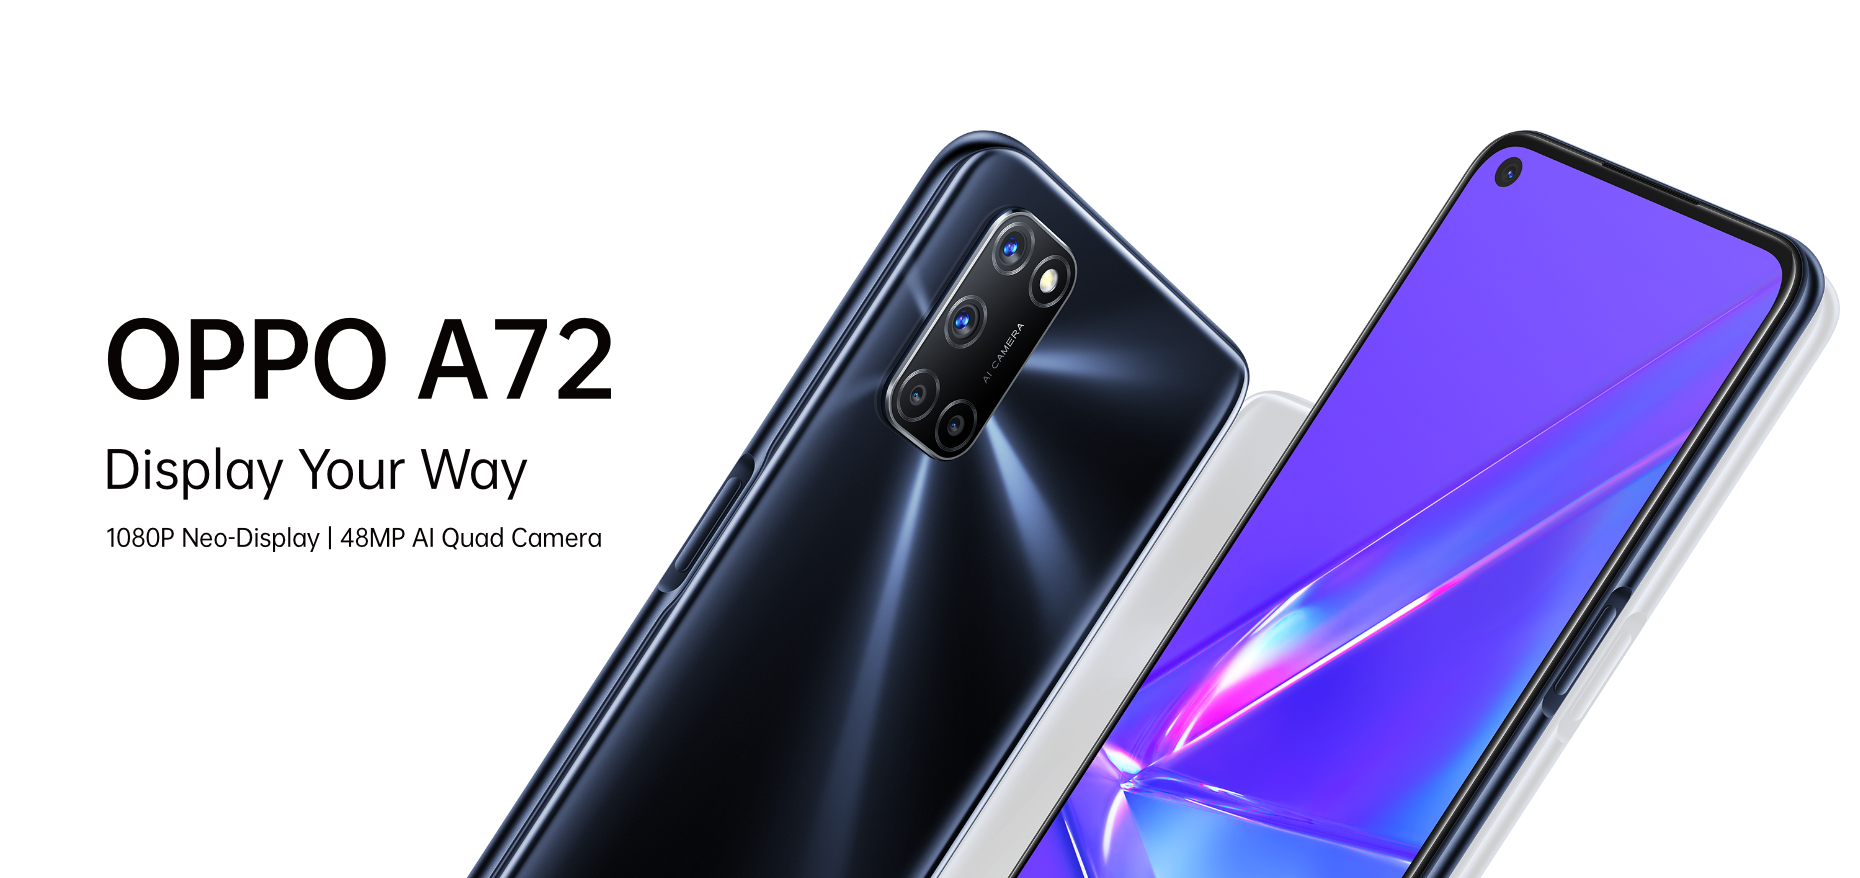 Oppo A72: Display Your Way. 1080P Neo-Display; 48MP AI Quad Camera